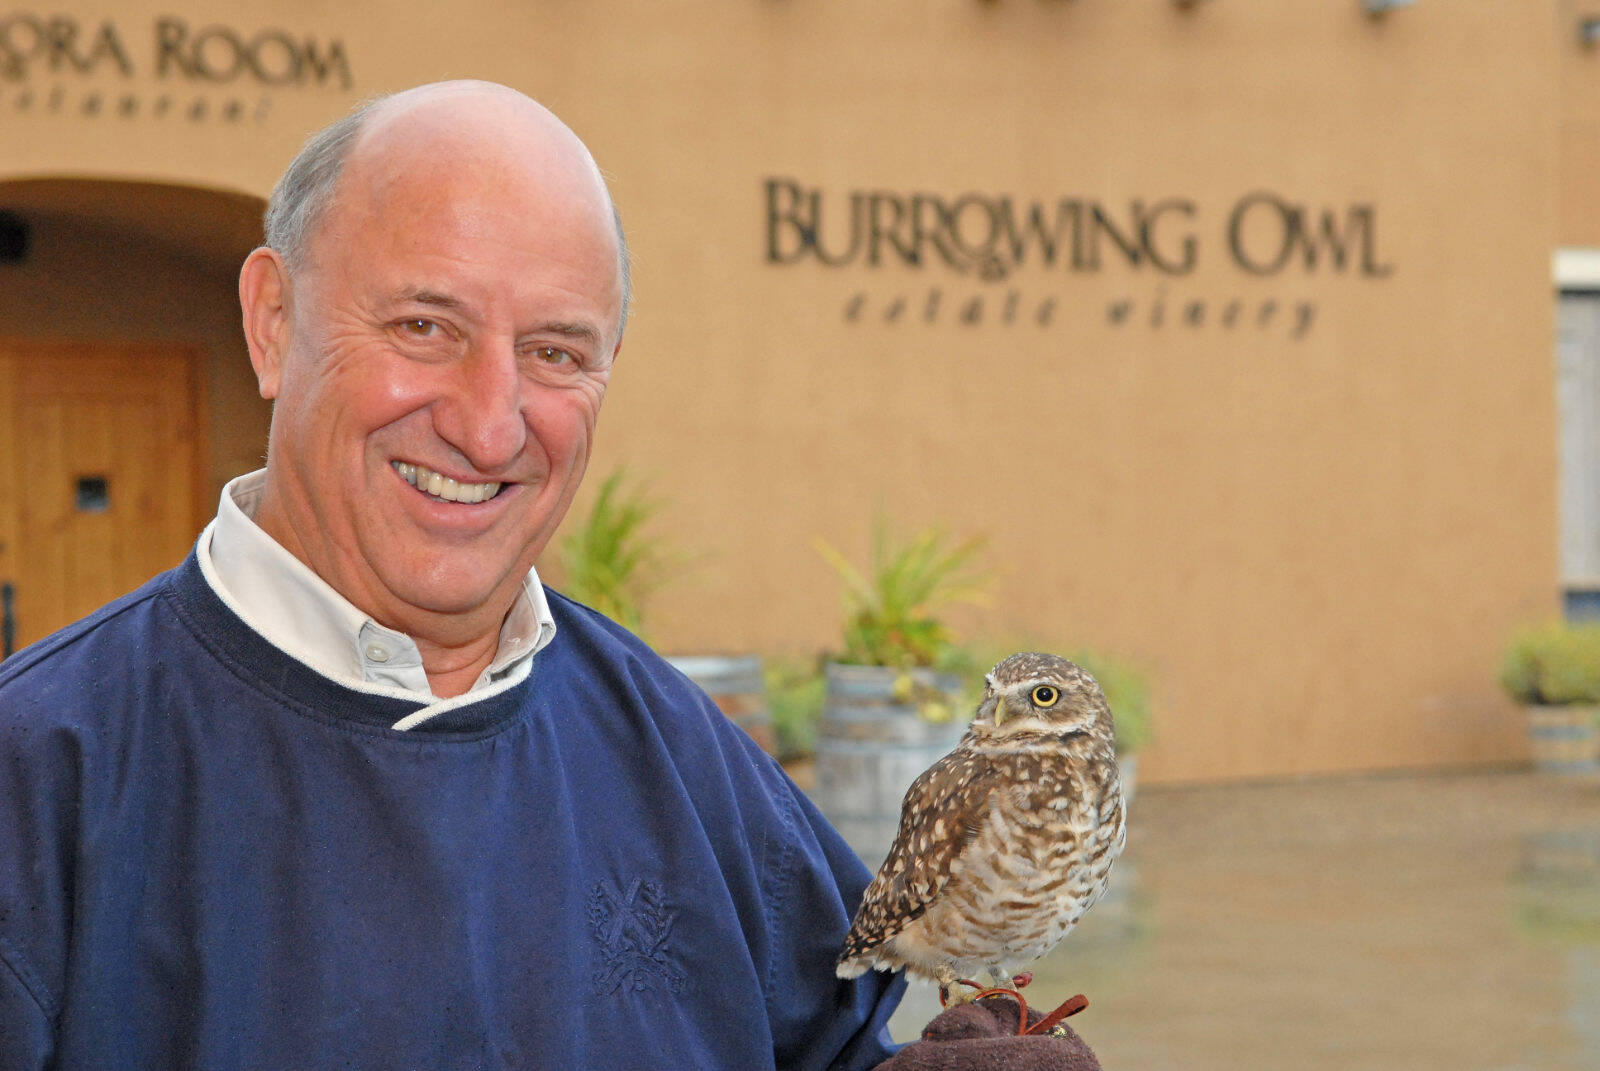 Burrowing Owl Estate Winery in Oliver, B.C., donates all tasting fees to the protection of the endangered burrowing owl. Photo courtesy Oliver Osoyoos Wine Country